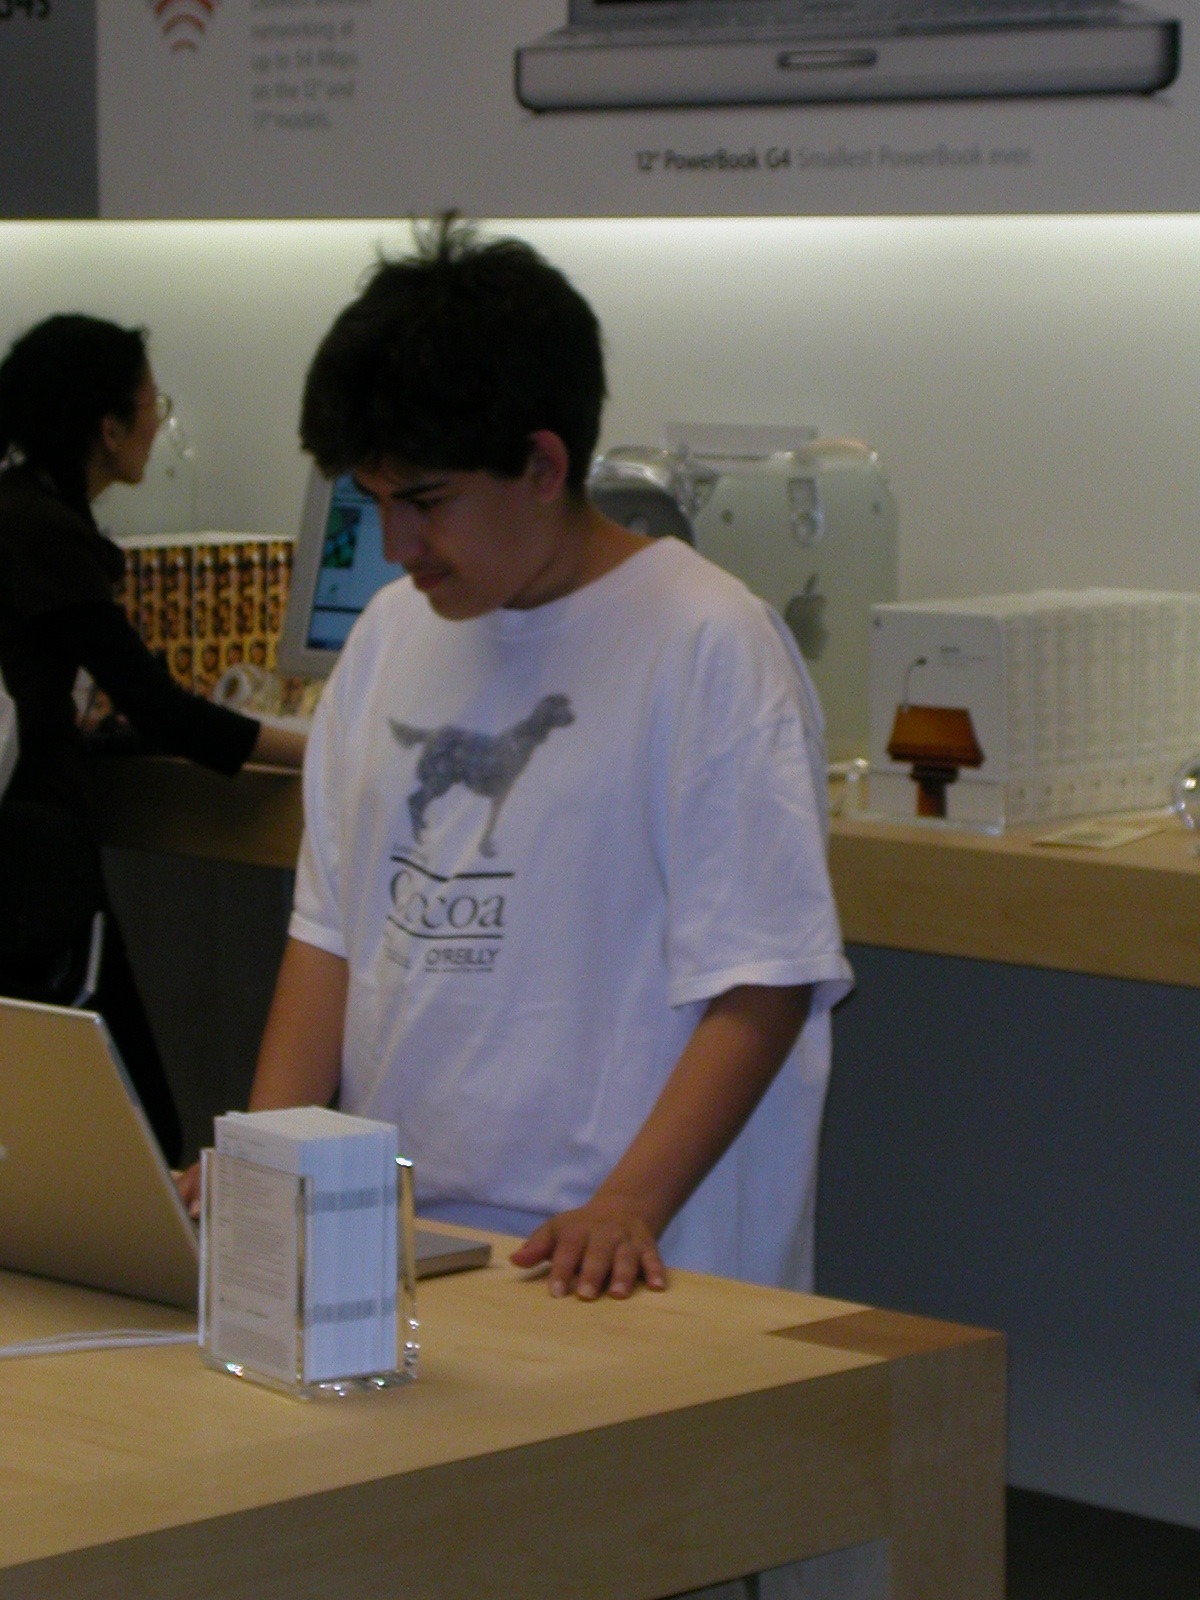 At the opening of the Apple Store on Michigan Ave in Chicago, 2003.